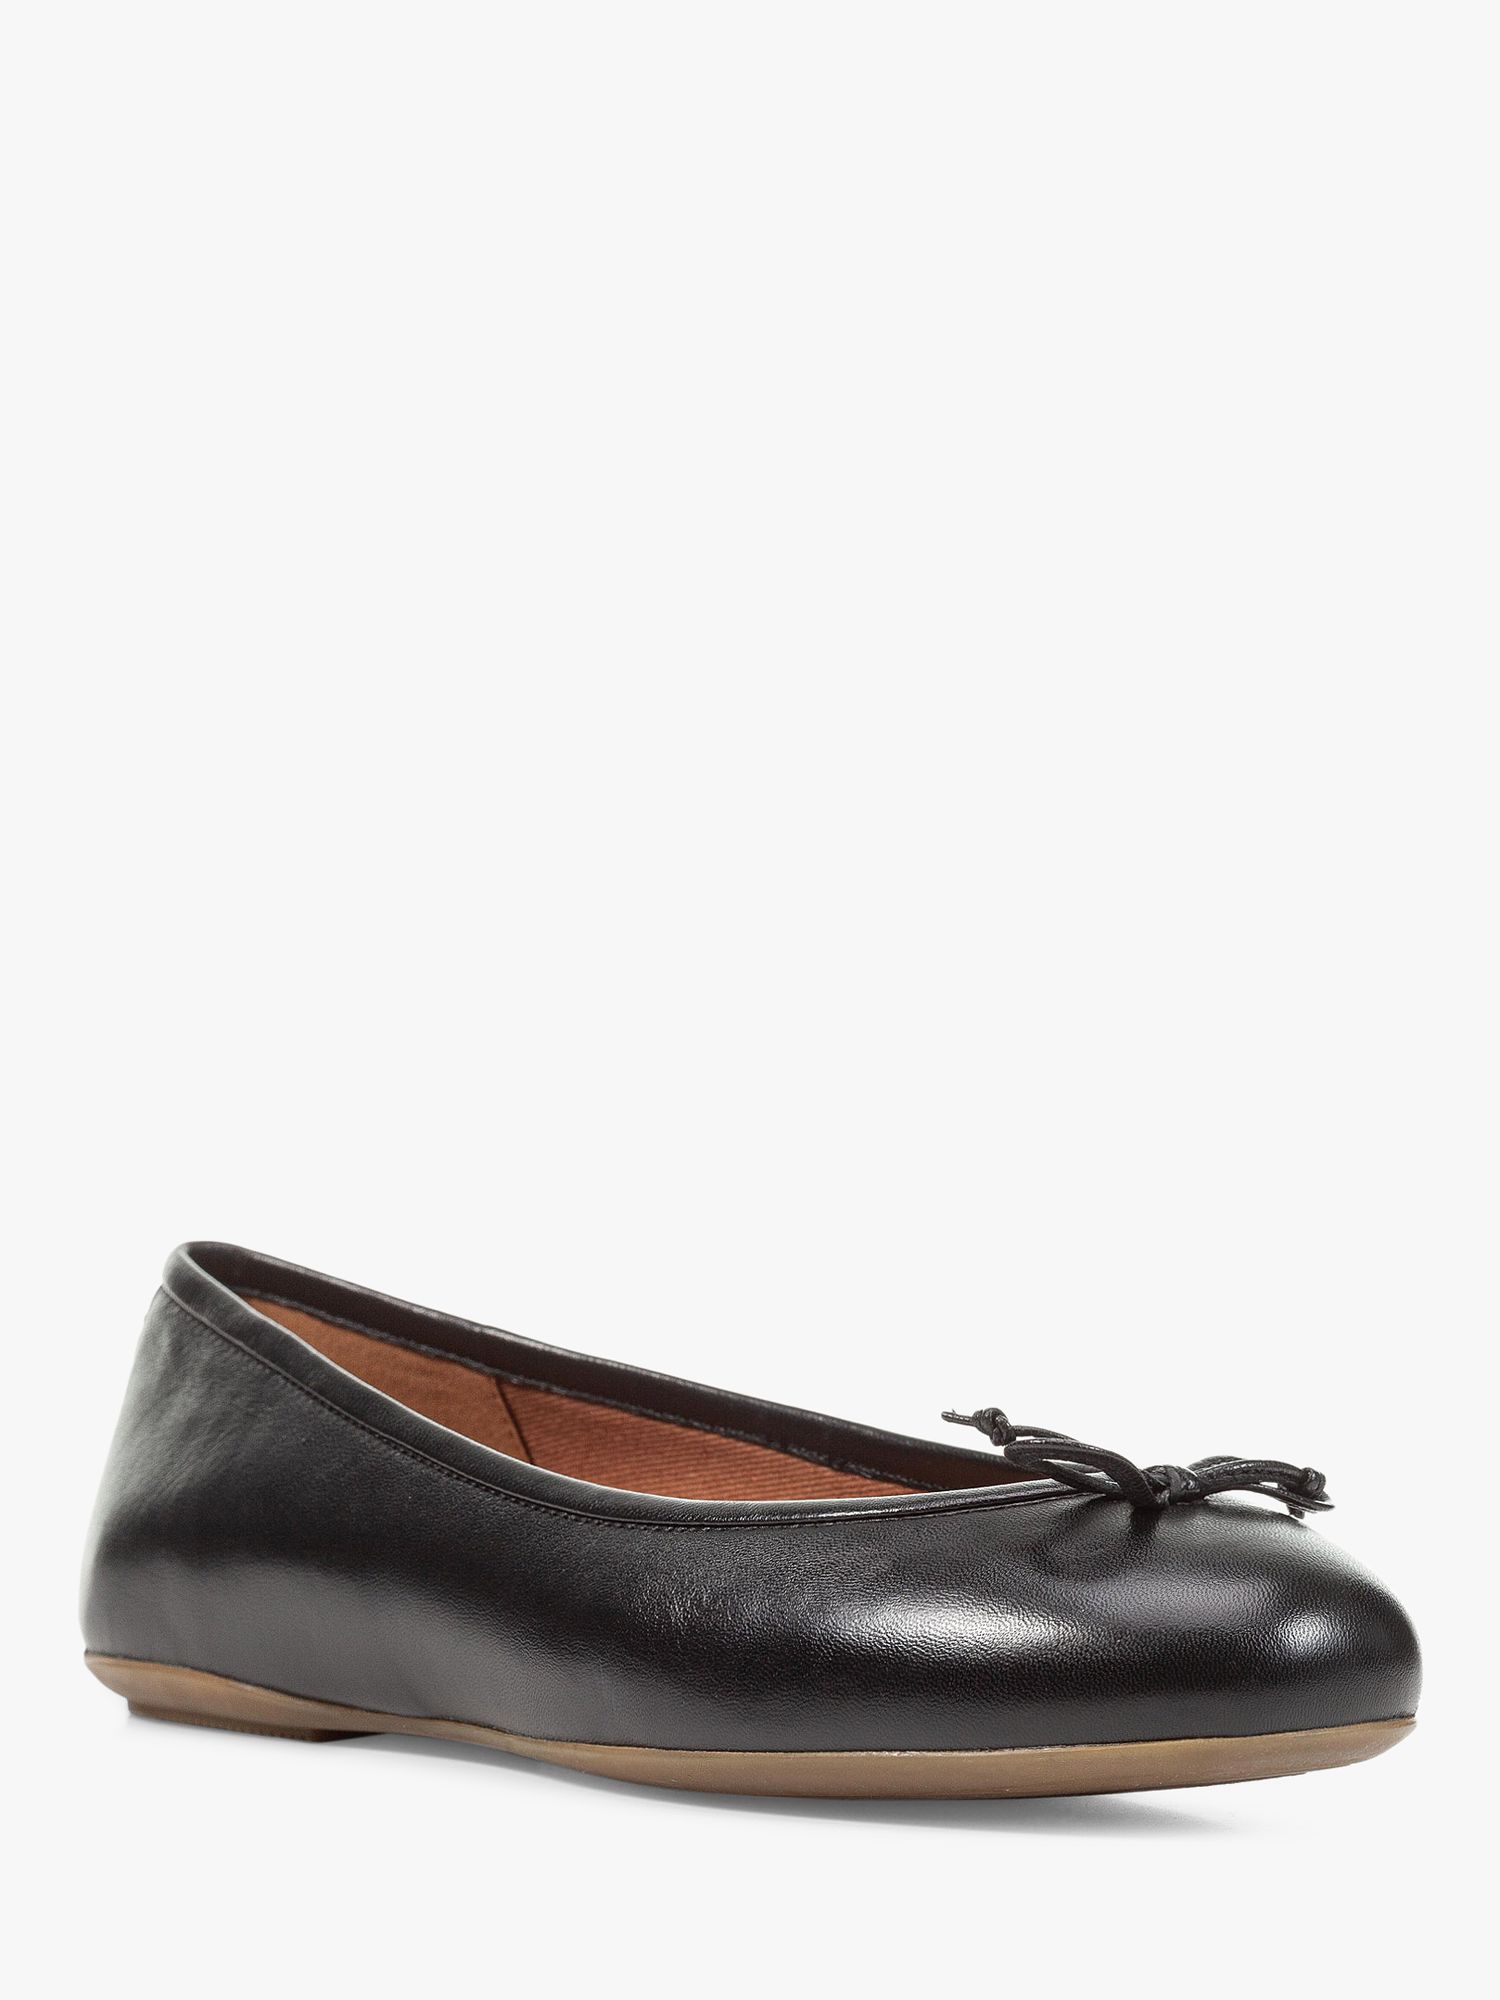 Buy Geox Palmaria Leather Ballerina Shoes, Black Online at johnlewis.com